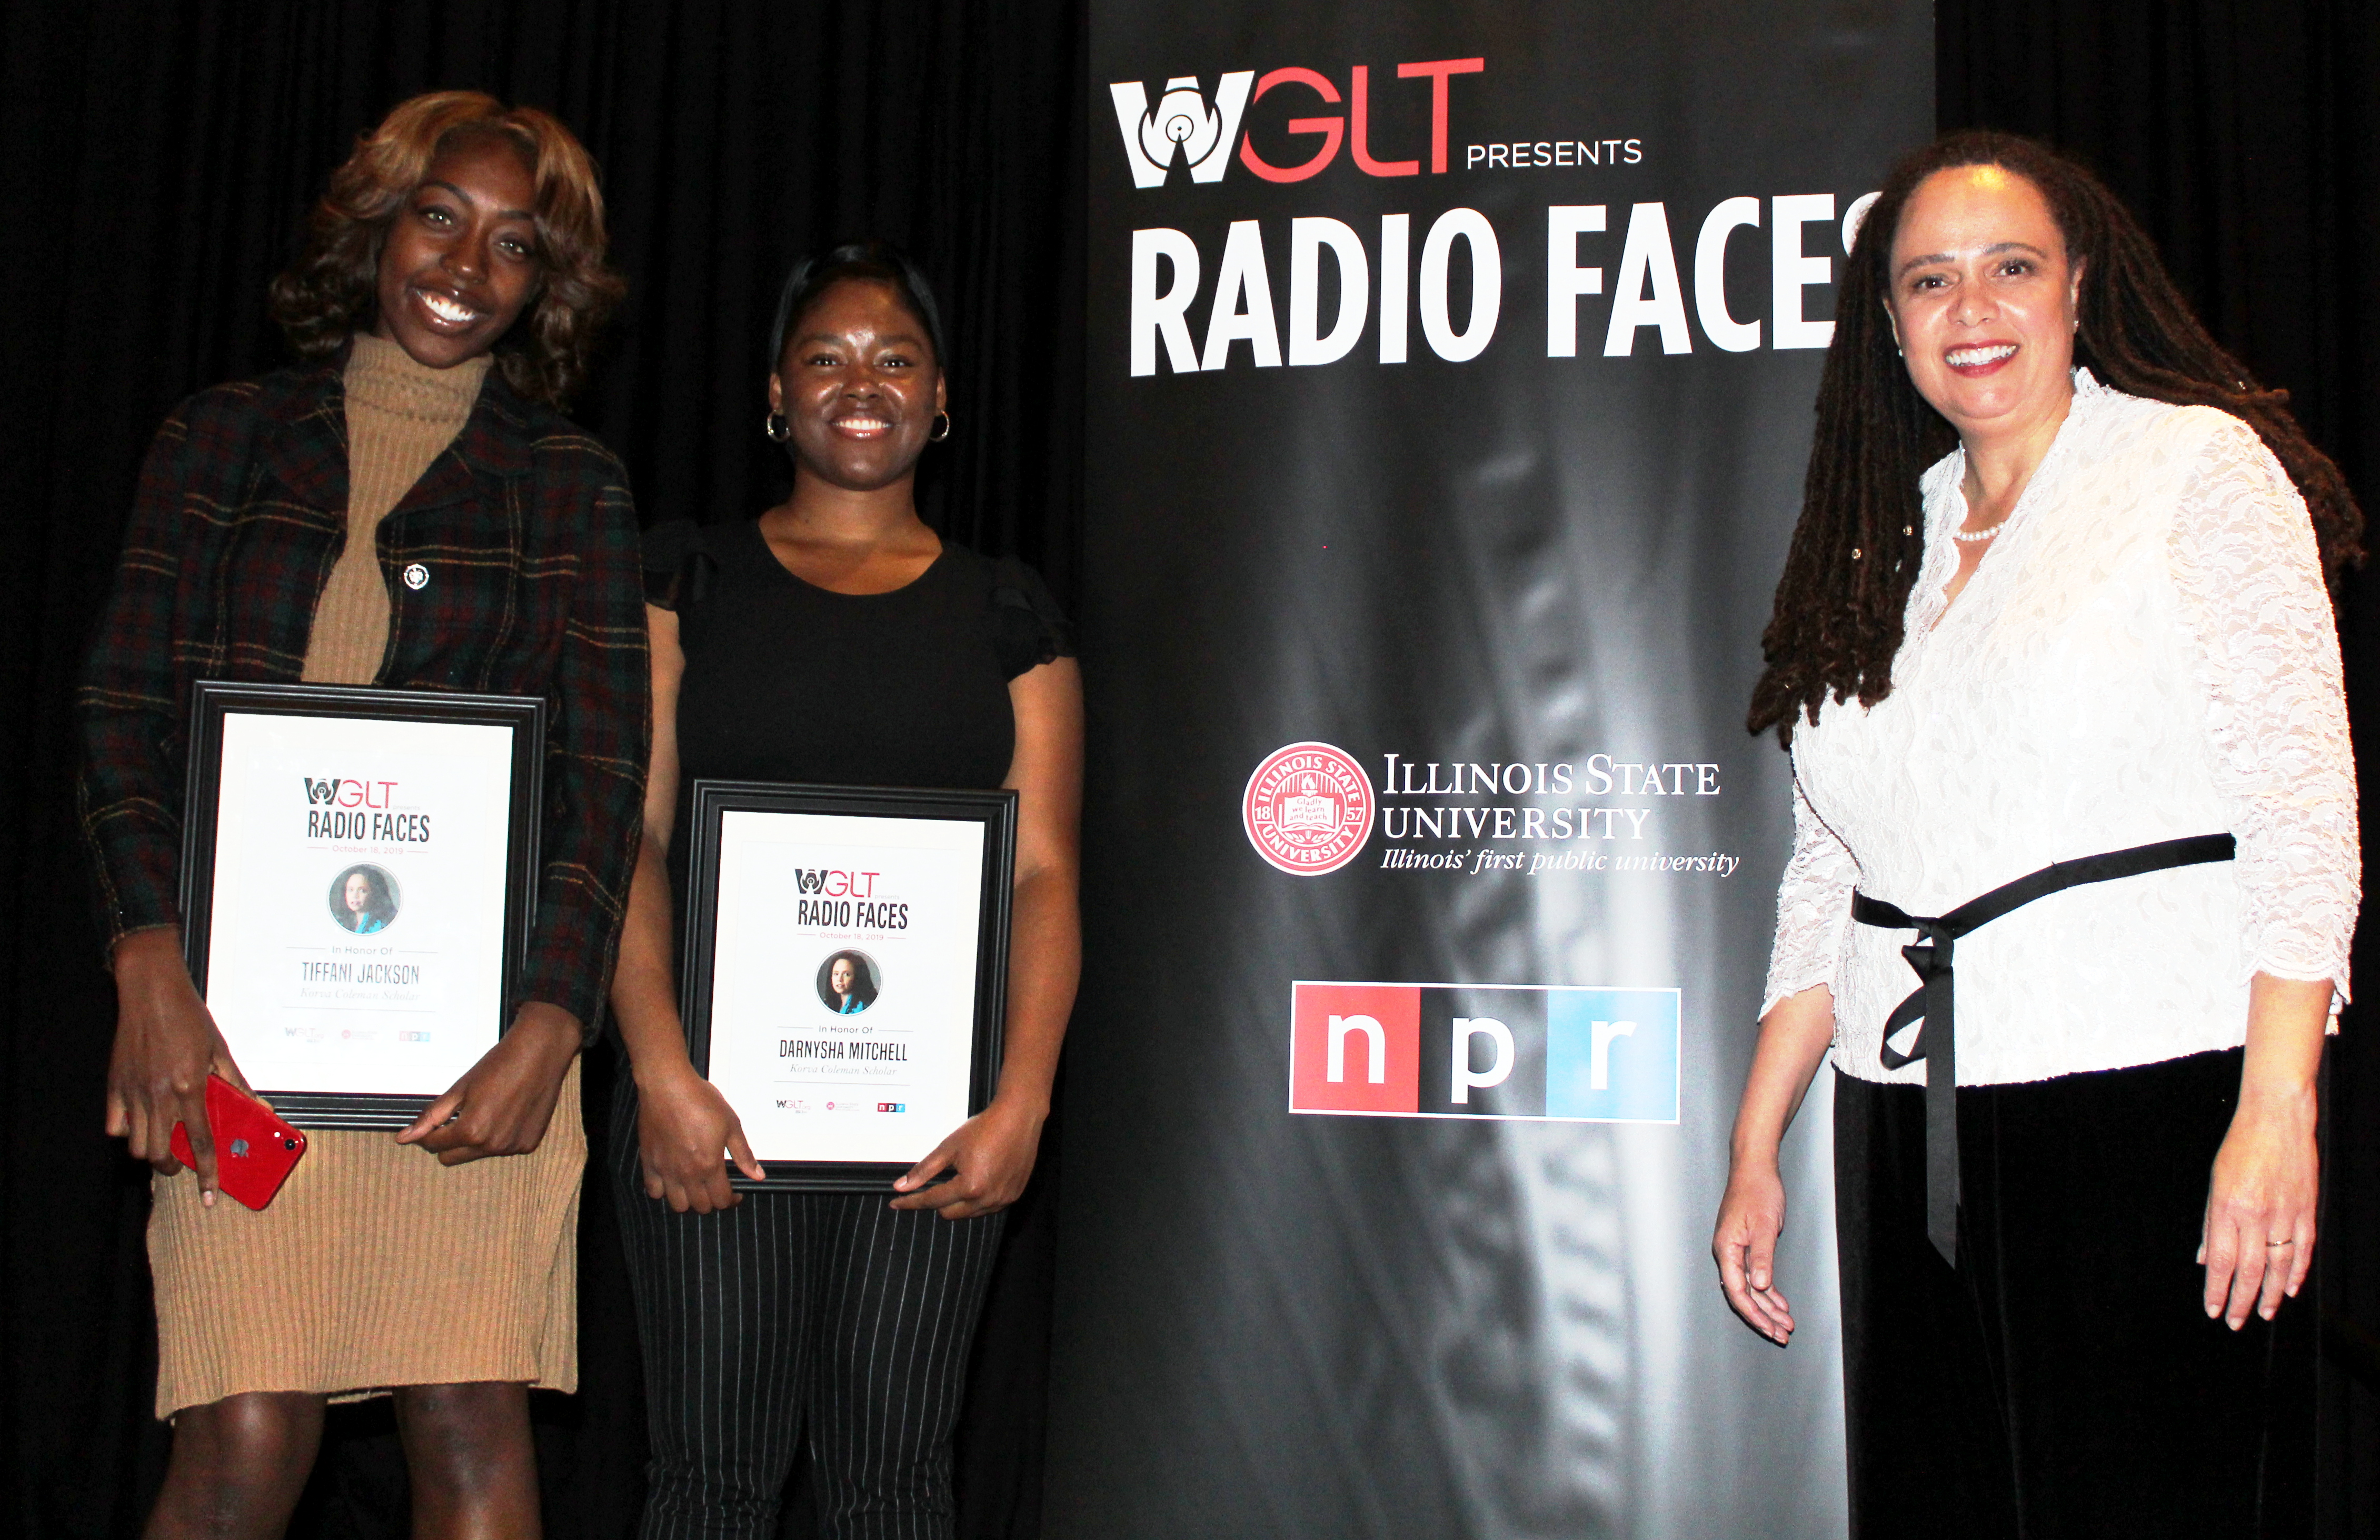 Student reporters Tiffani Jackson and Darnysha Mitchell, here with Korva Coleman, were named Korva Coleman Scholars at WGLT’s Radio Faces event October 18 at the Marriott Hotel and Conference Center in Uptown Normal. (Photo by WGLT student photographer Izzy Carroll)